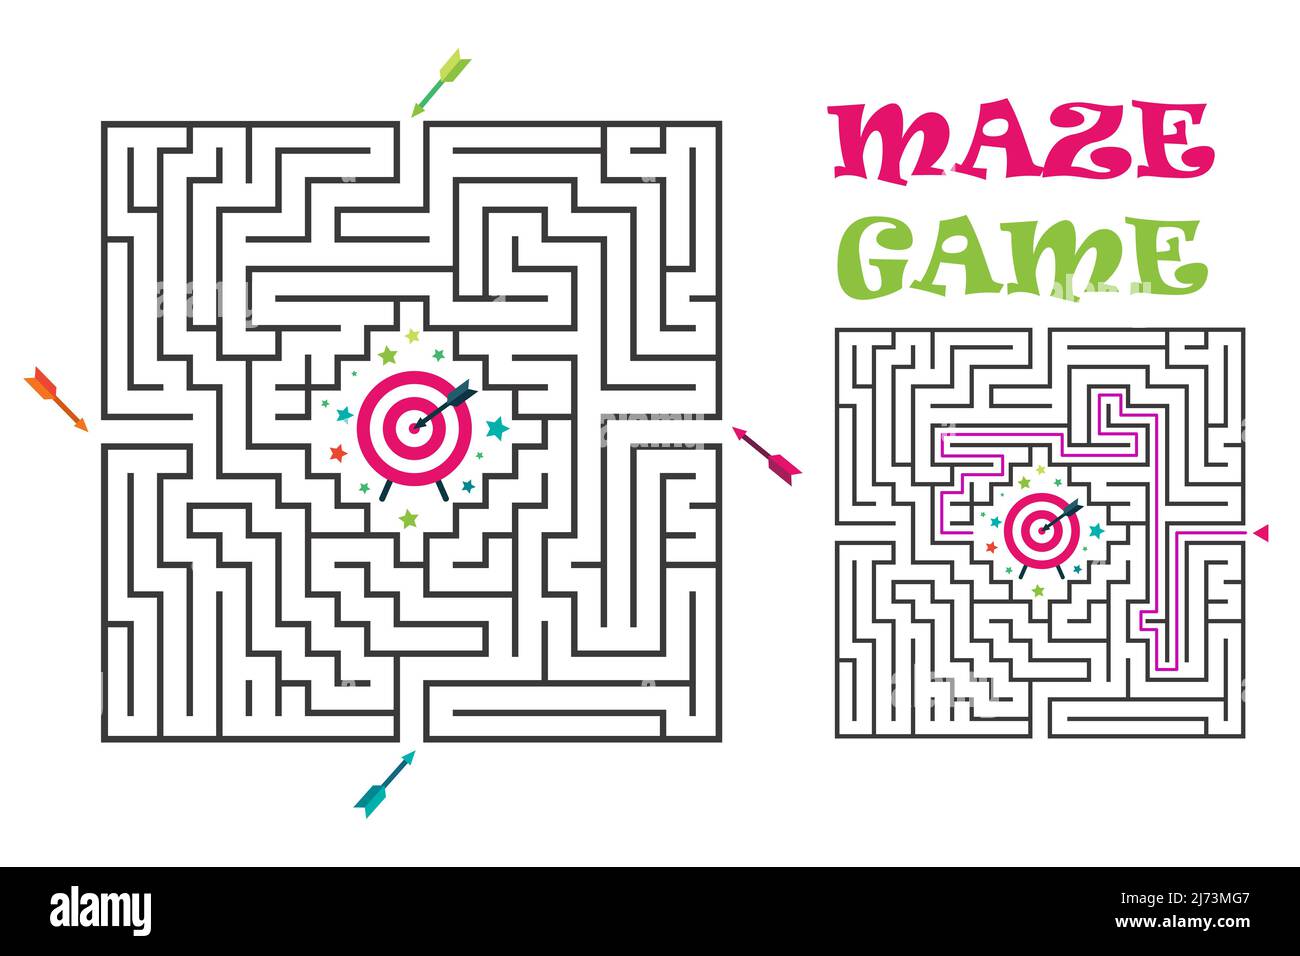 Square maze labyrinth game for kids. Labyrinth logic conundrum with target and arrows. 4 entrances and one right way to go. Vector flat illustration is Stock Vector